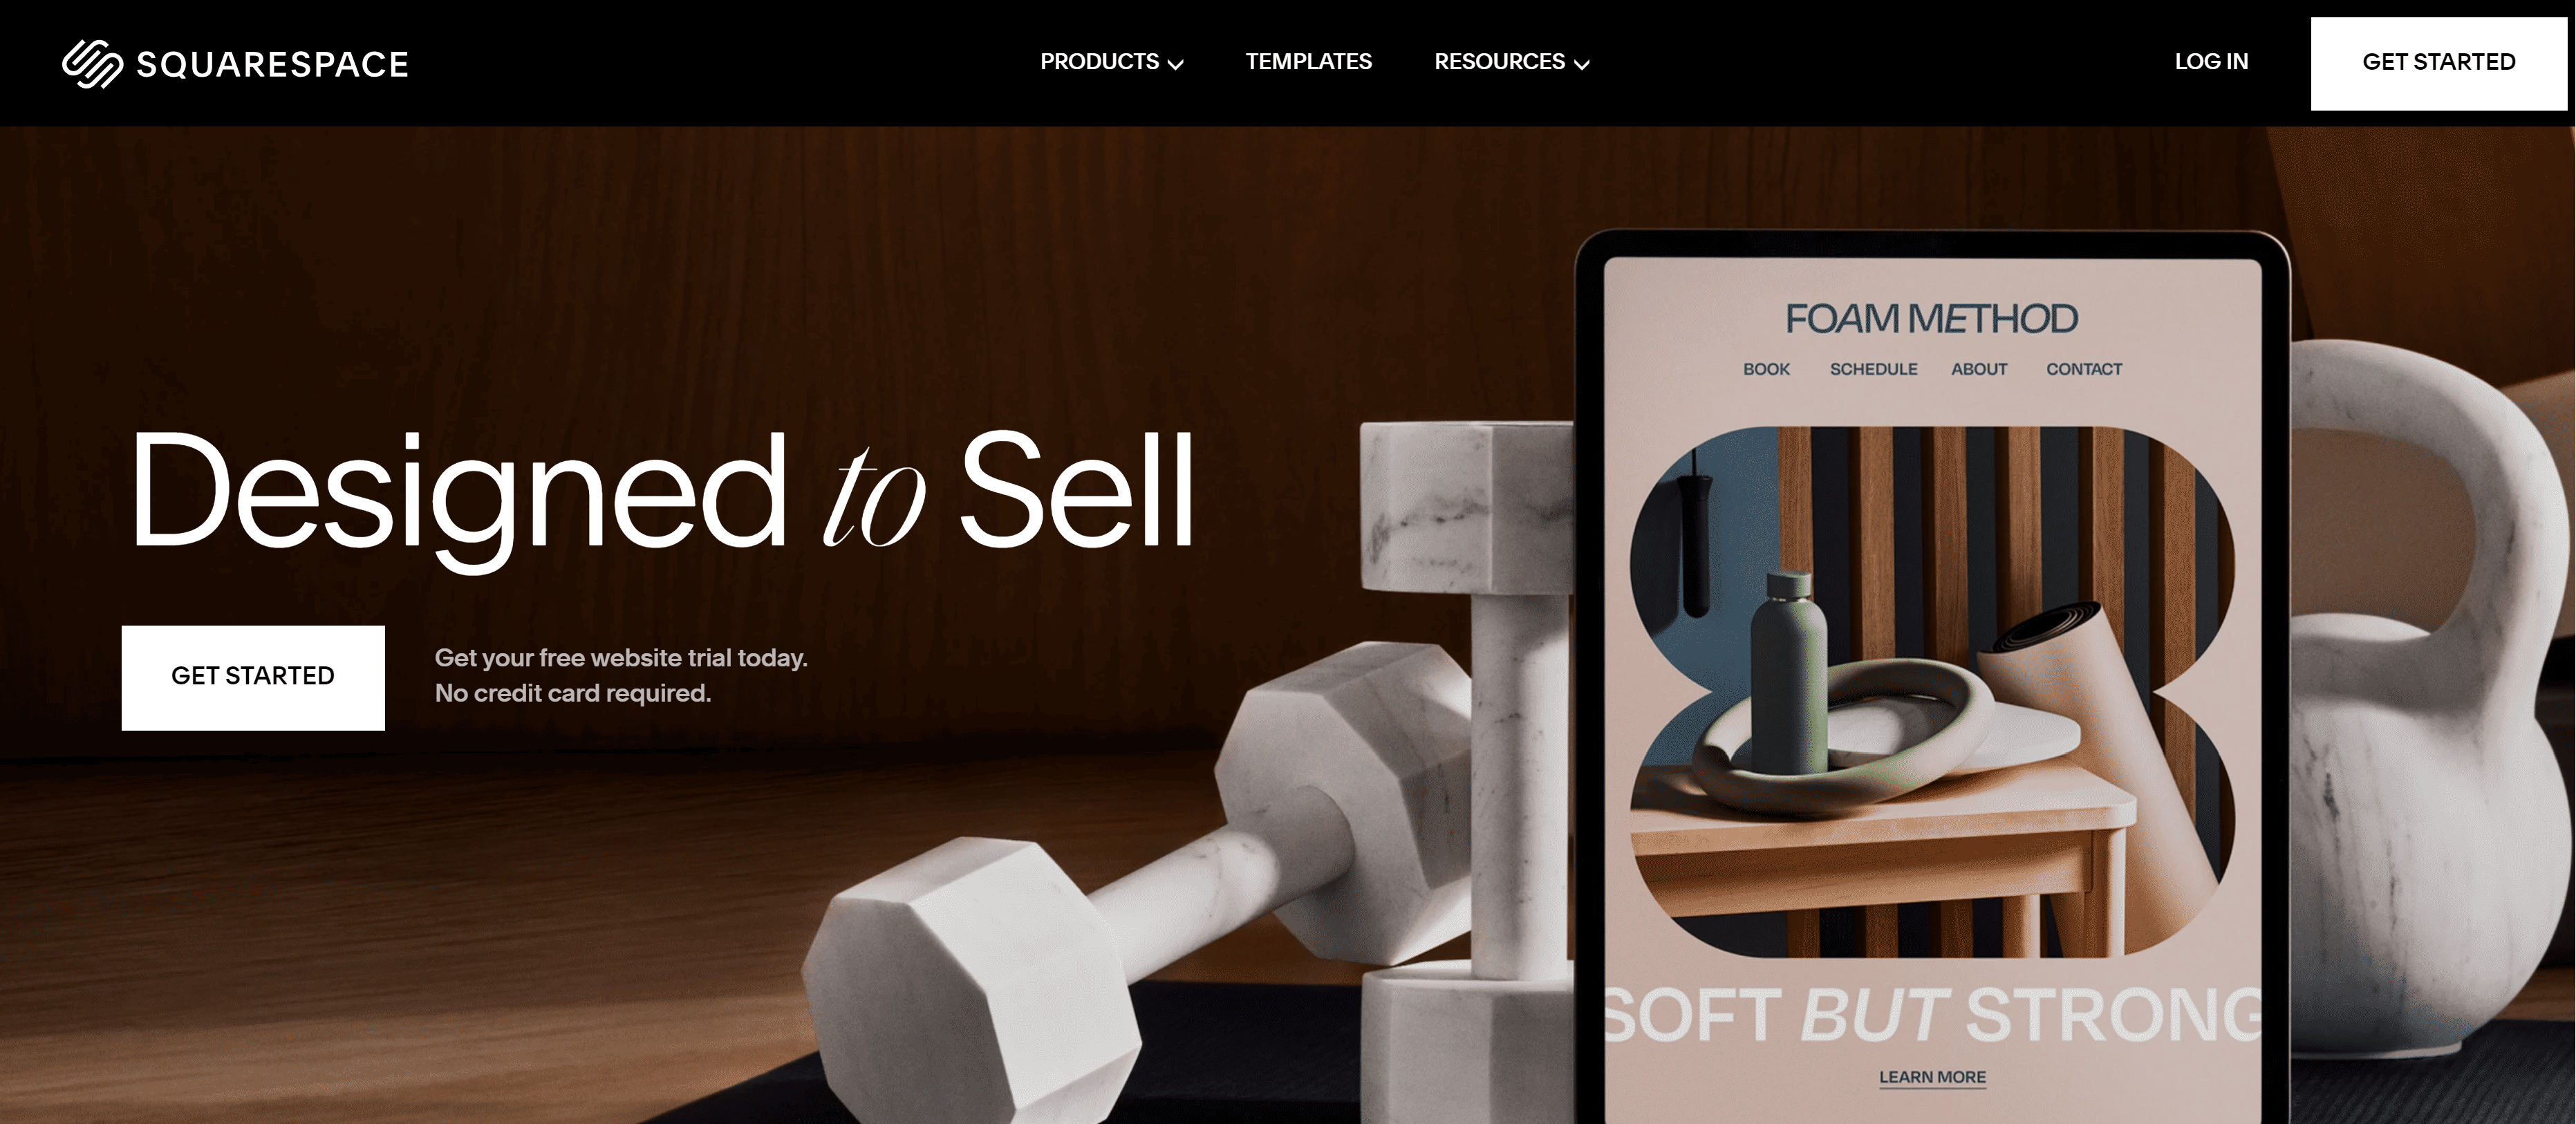 A picture showing the Squarespace homepage